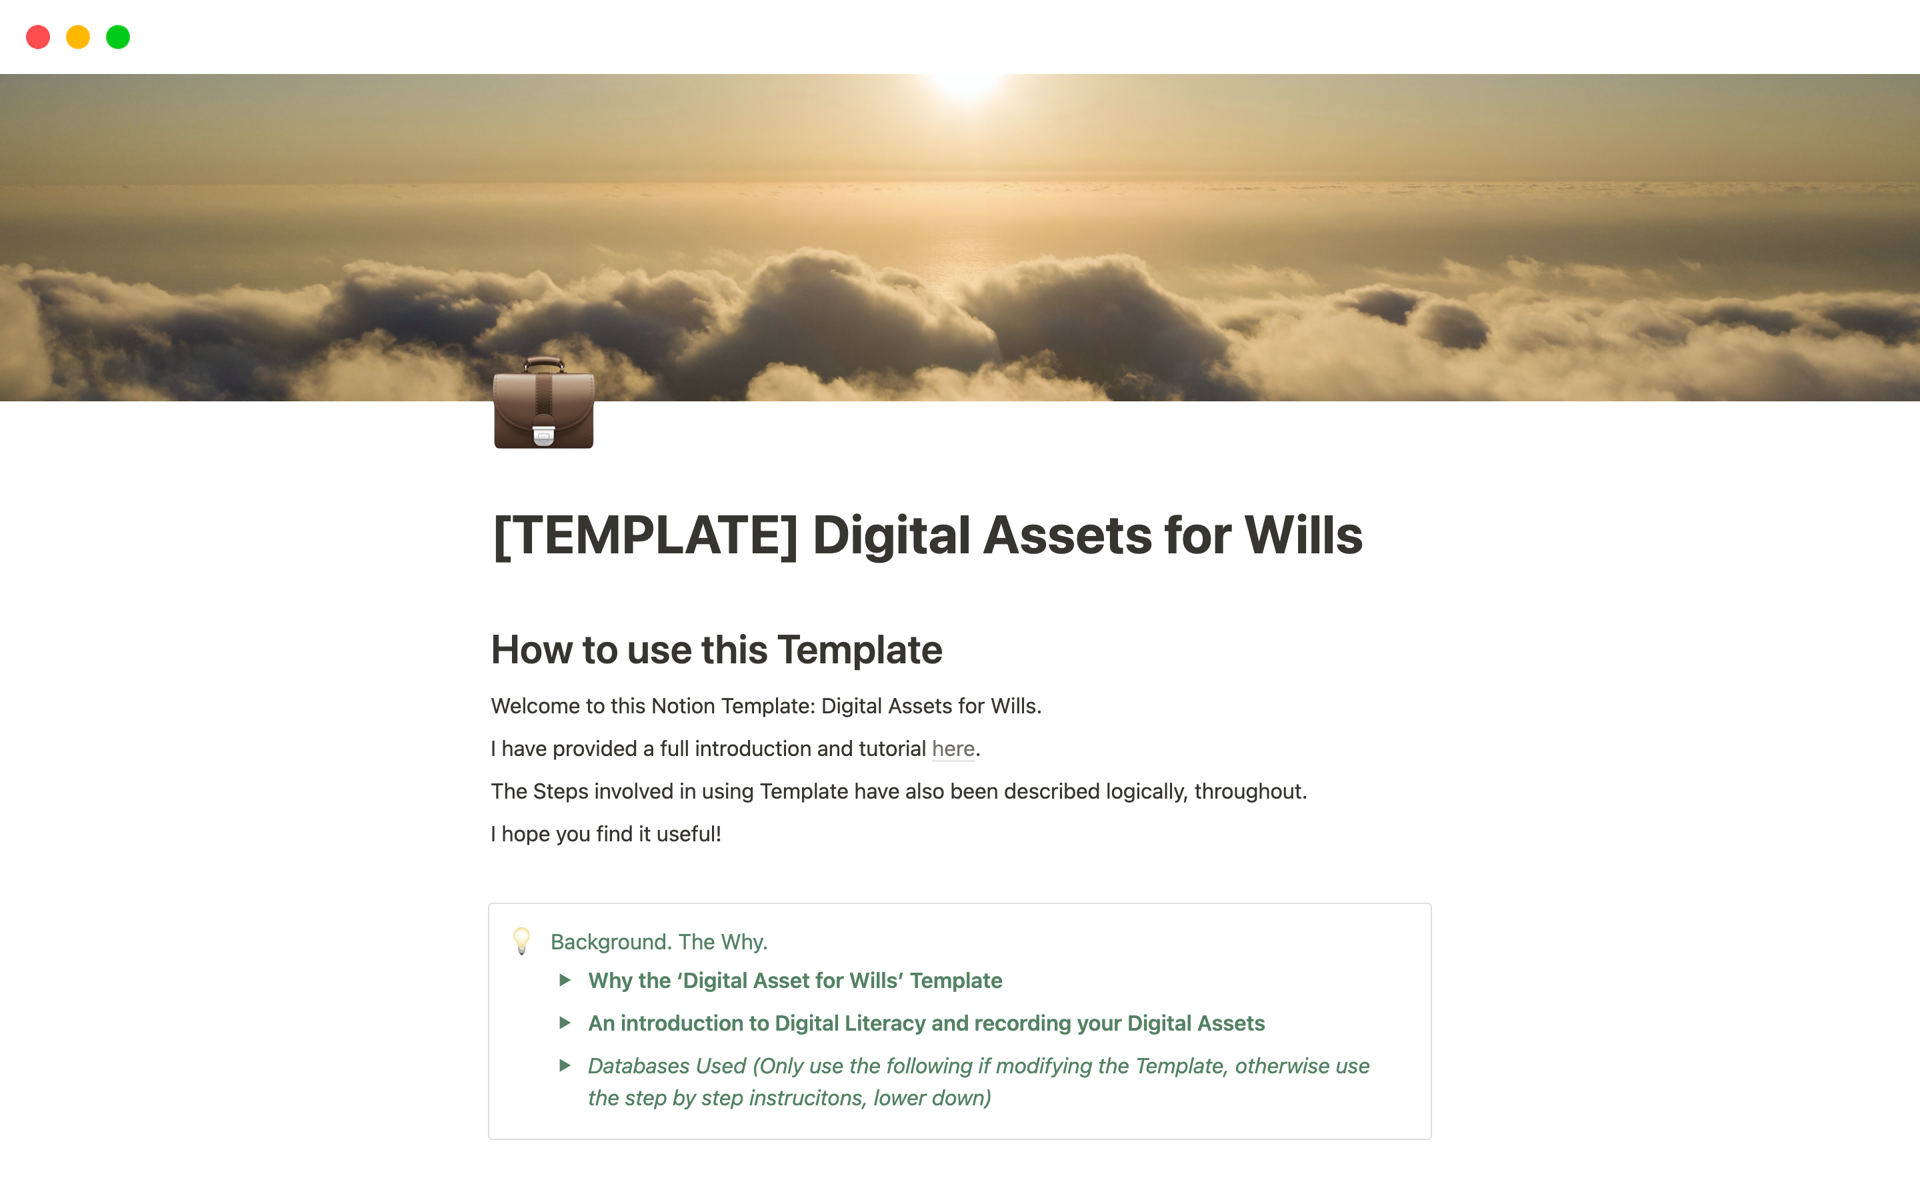 Helping those writing a Will to document their Digital Assets. 